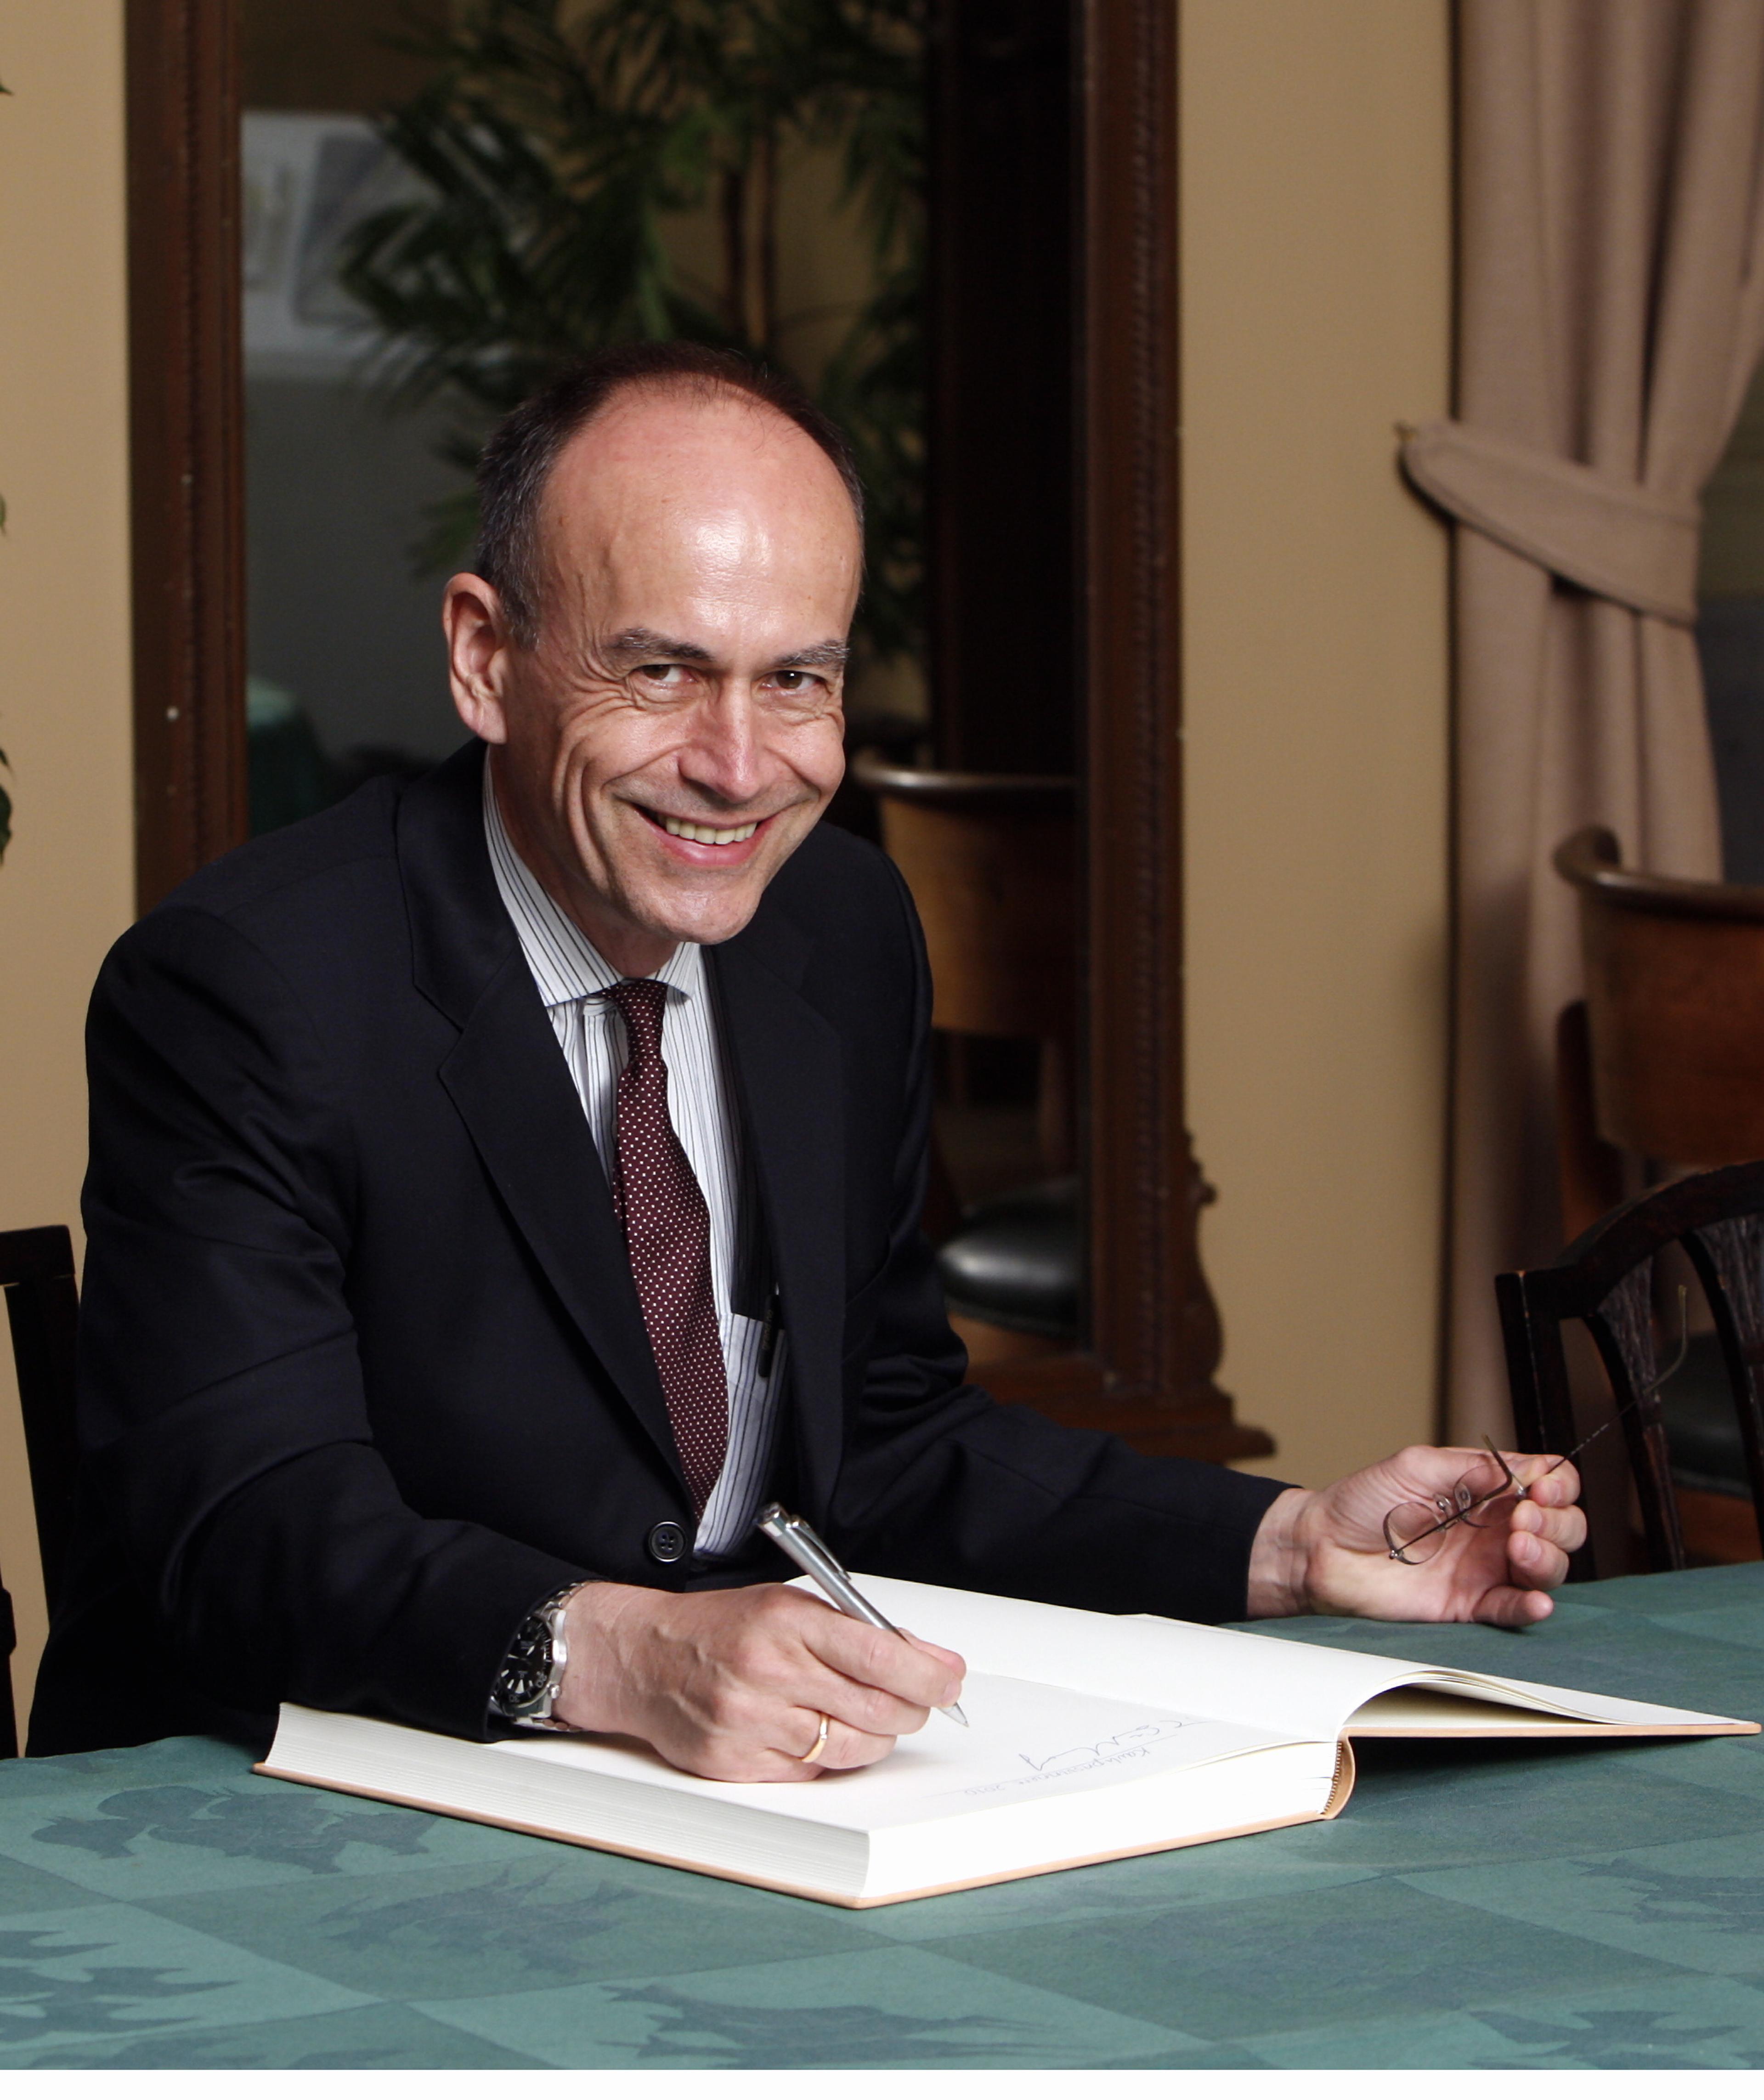 Thomas C. Südhof signing the guest book